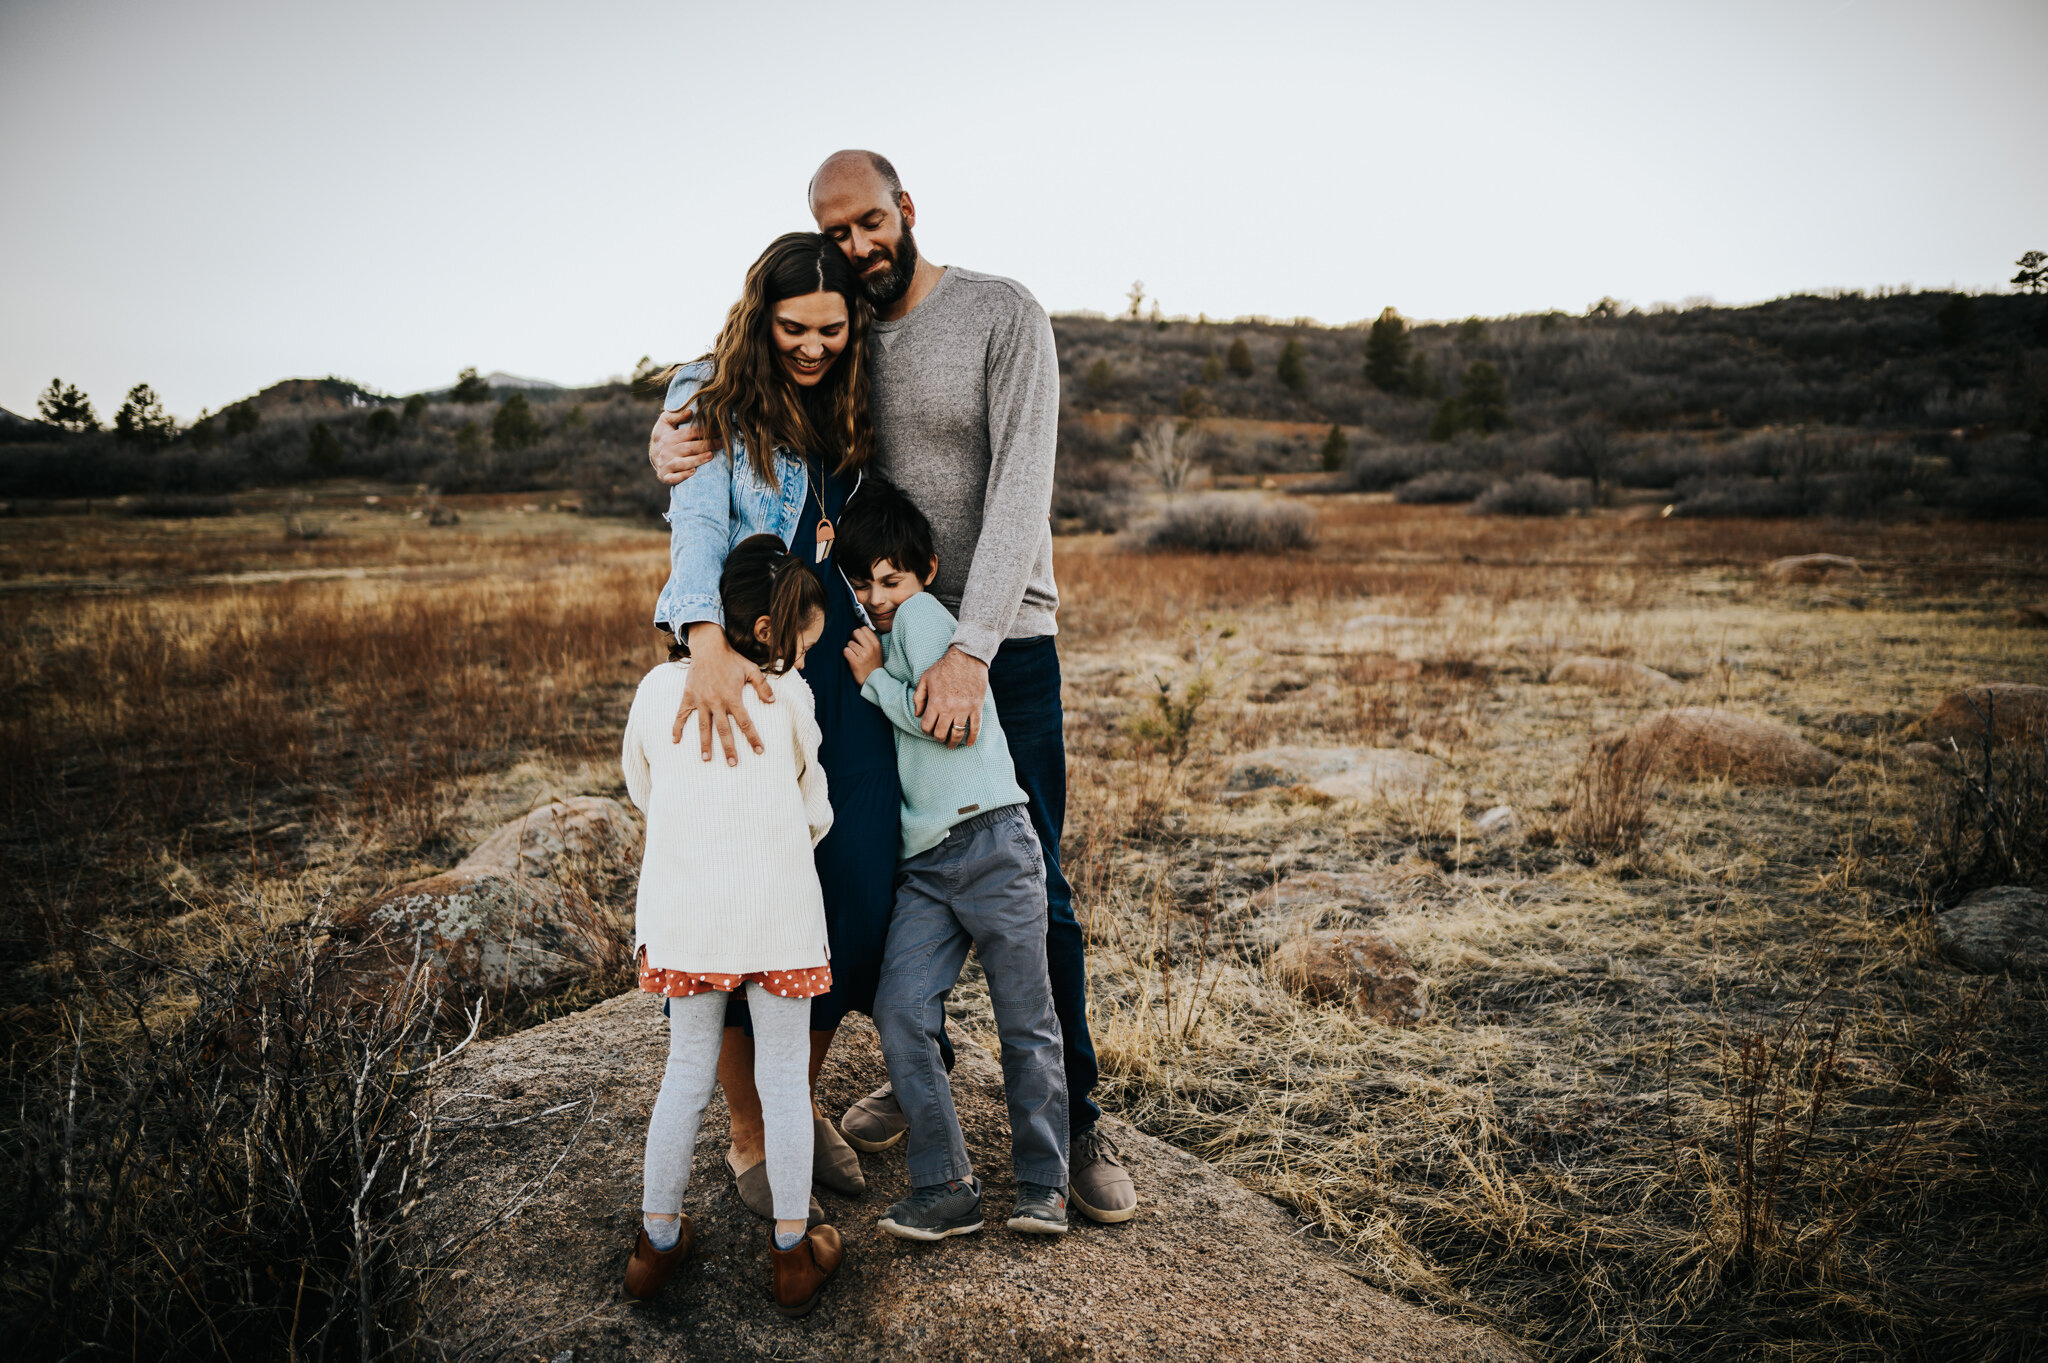 Lisa Liberati Family Session Colorado Springs Photographer Sunset Cheyenne Canyon Mother Father Son Daughter Wild Prairie Photography-9-2020.jpg